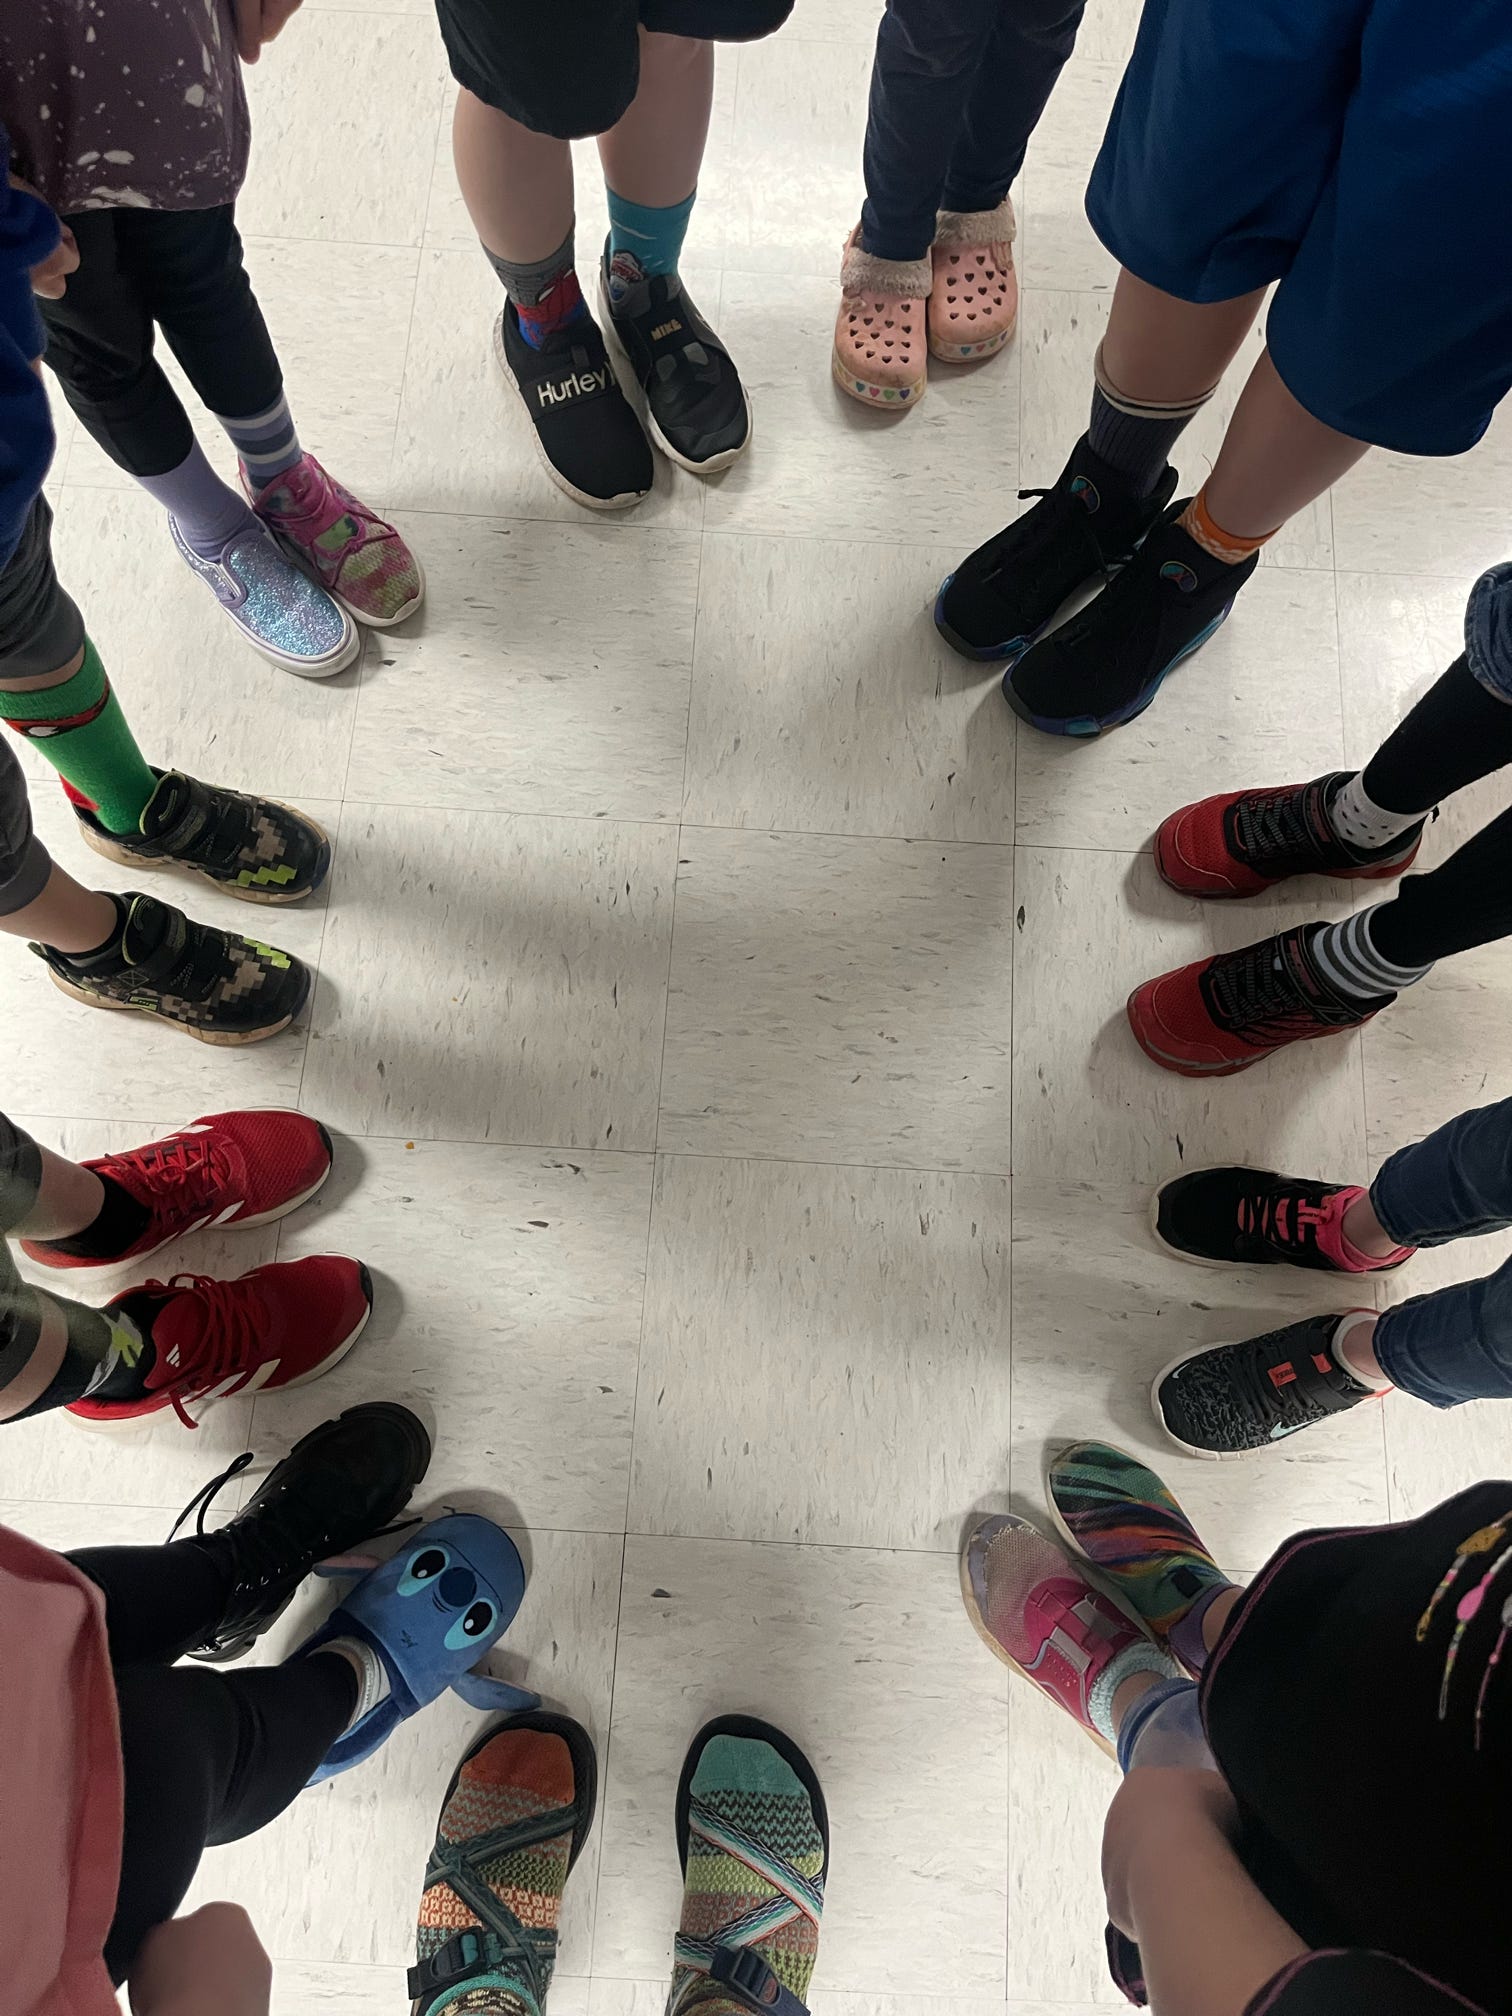 Fox in Sox Wednesday: Students wore mismatched shoes or crazy socks to celebrate Read Across America Week.